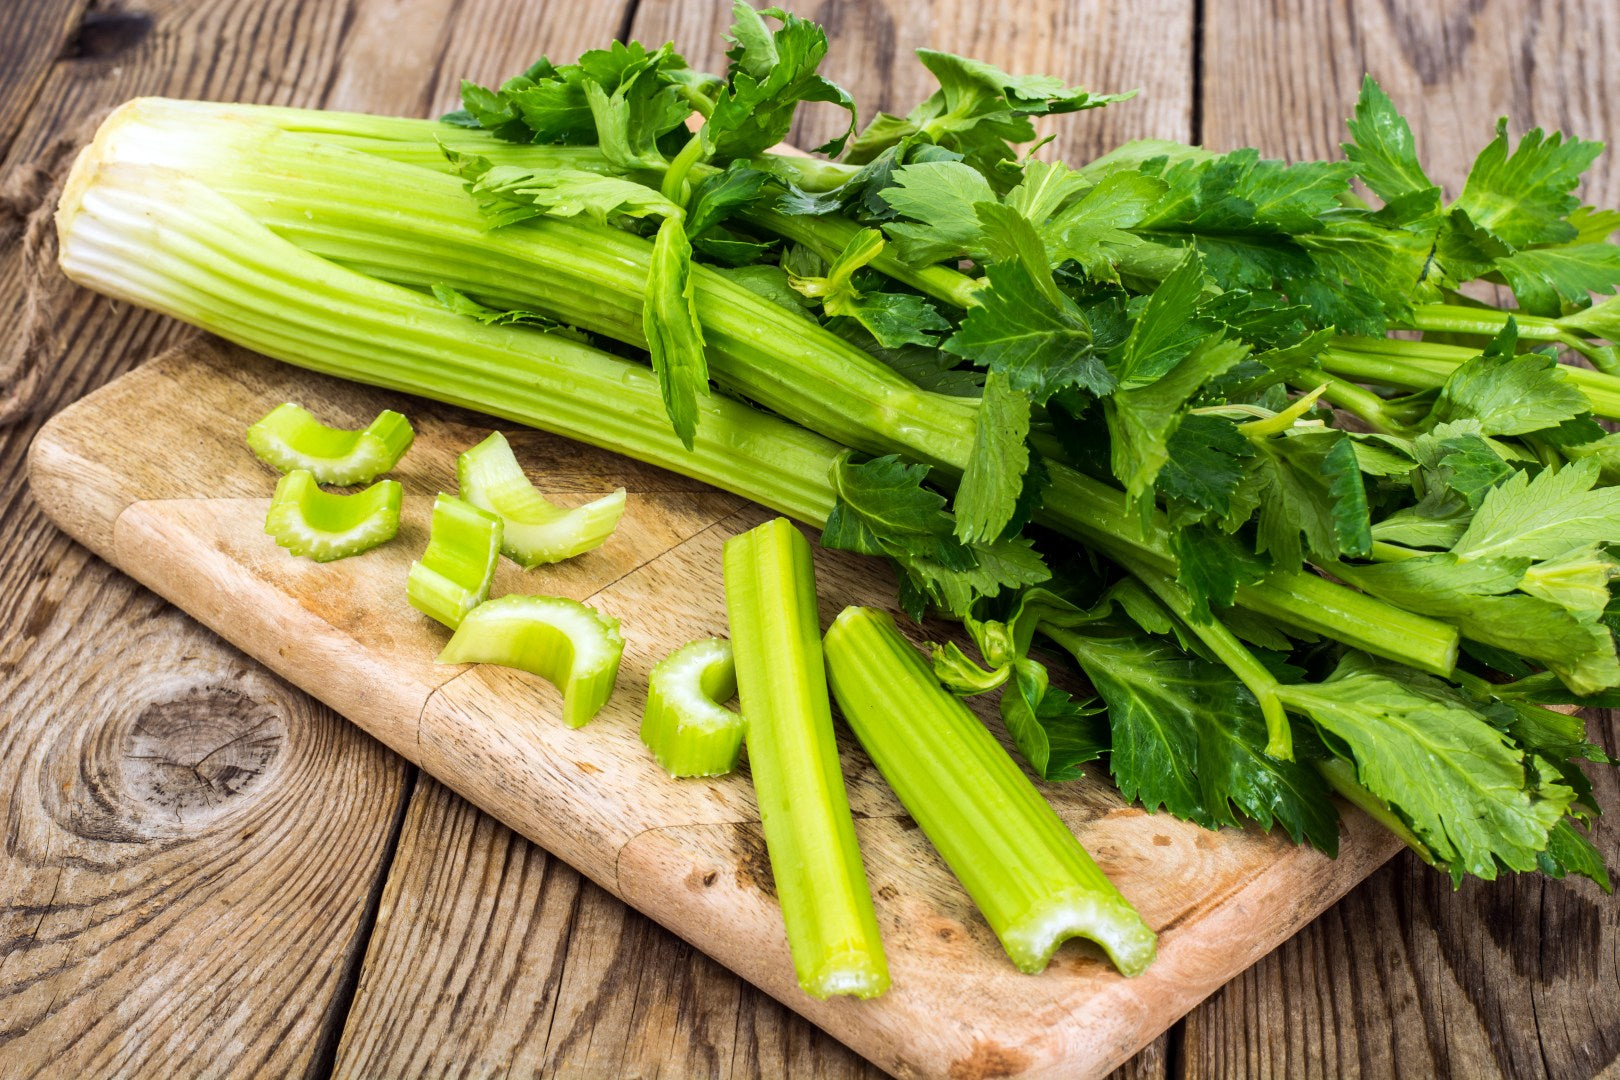 A head of celery on a wooden chopping board